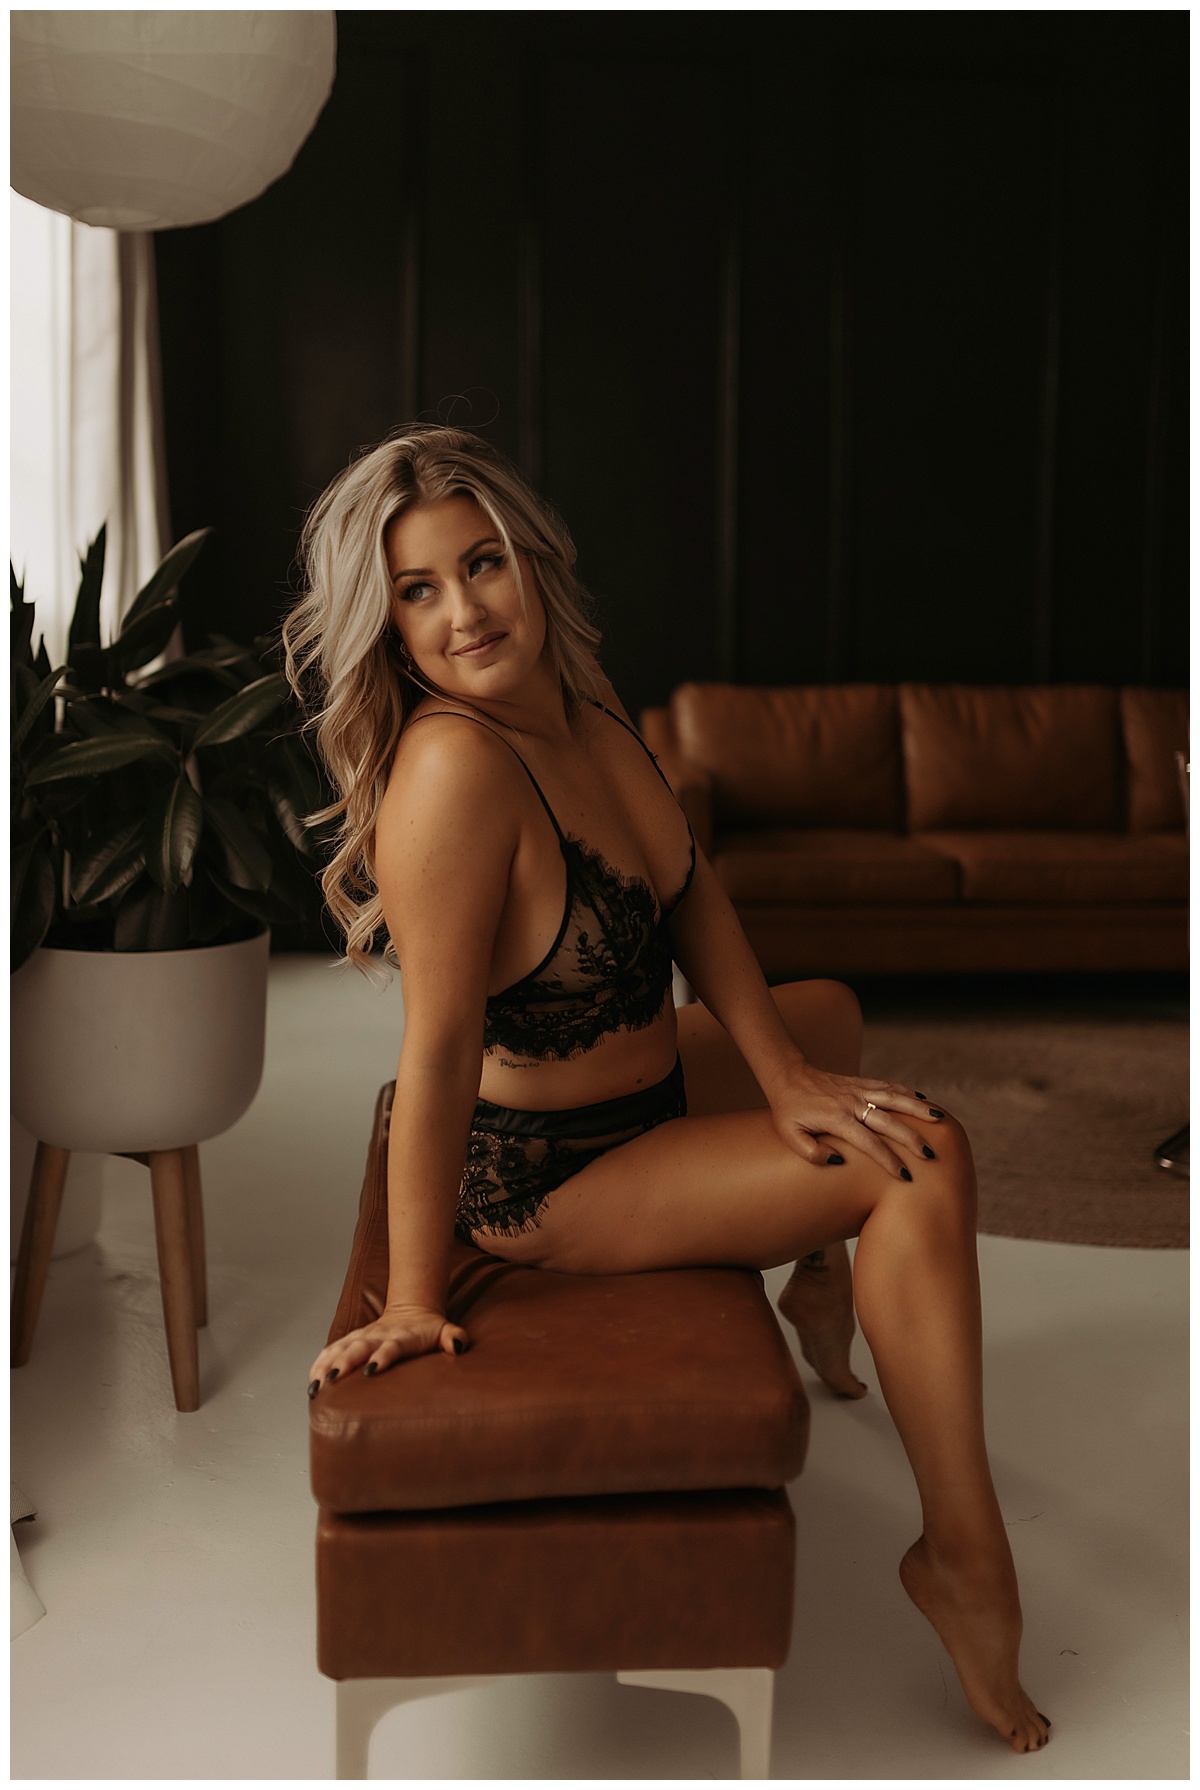 Female sits on the chair wearing black lace lingerie for Minneapolis Boudoir Photographer